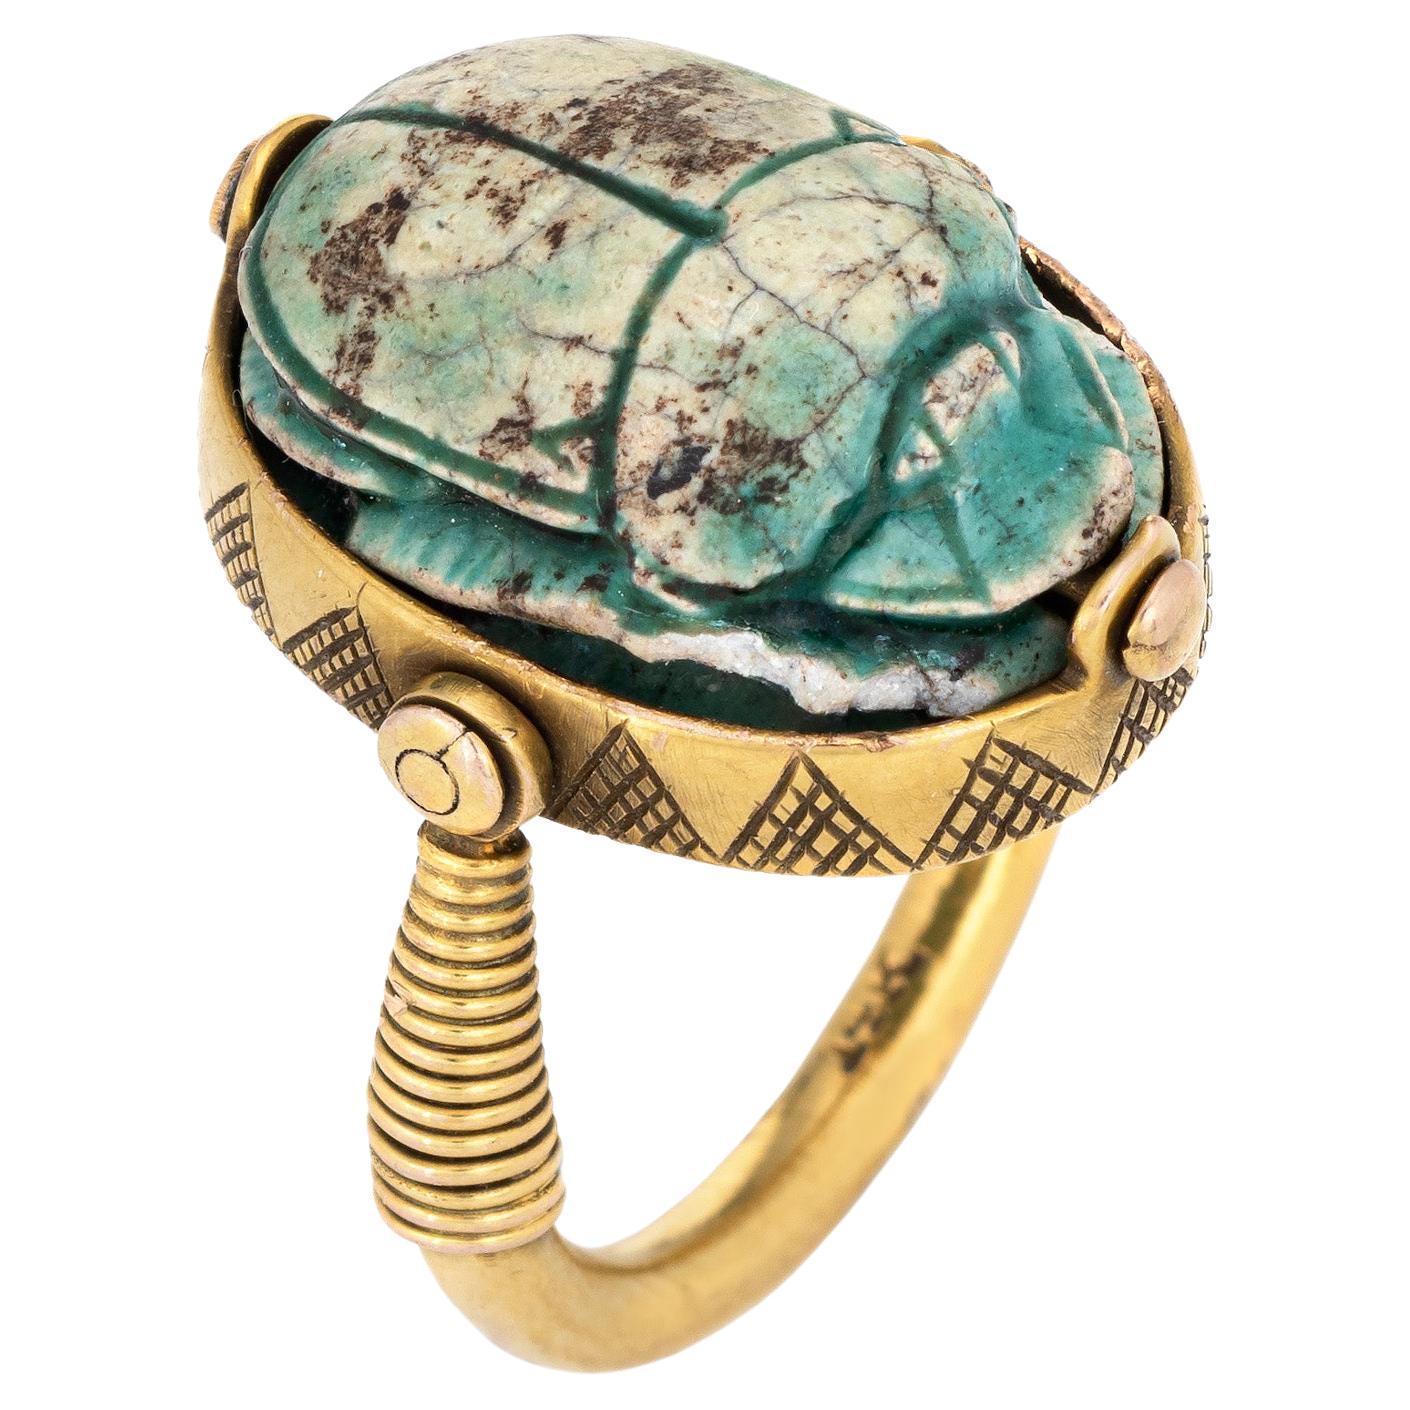 Egyptian Scarb Beetle Flip Ring Vintage 14k Yellow Gold Faience Swivel